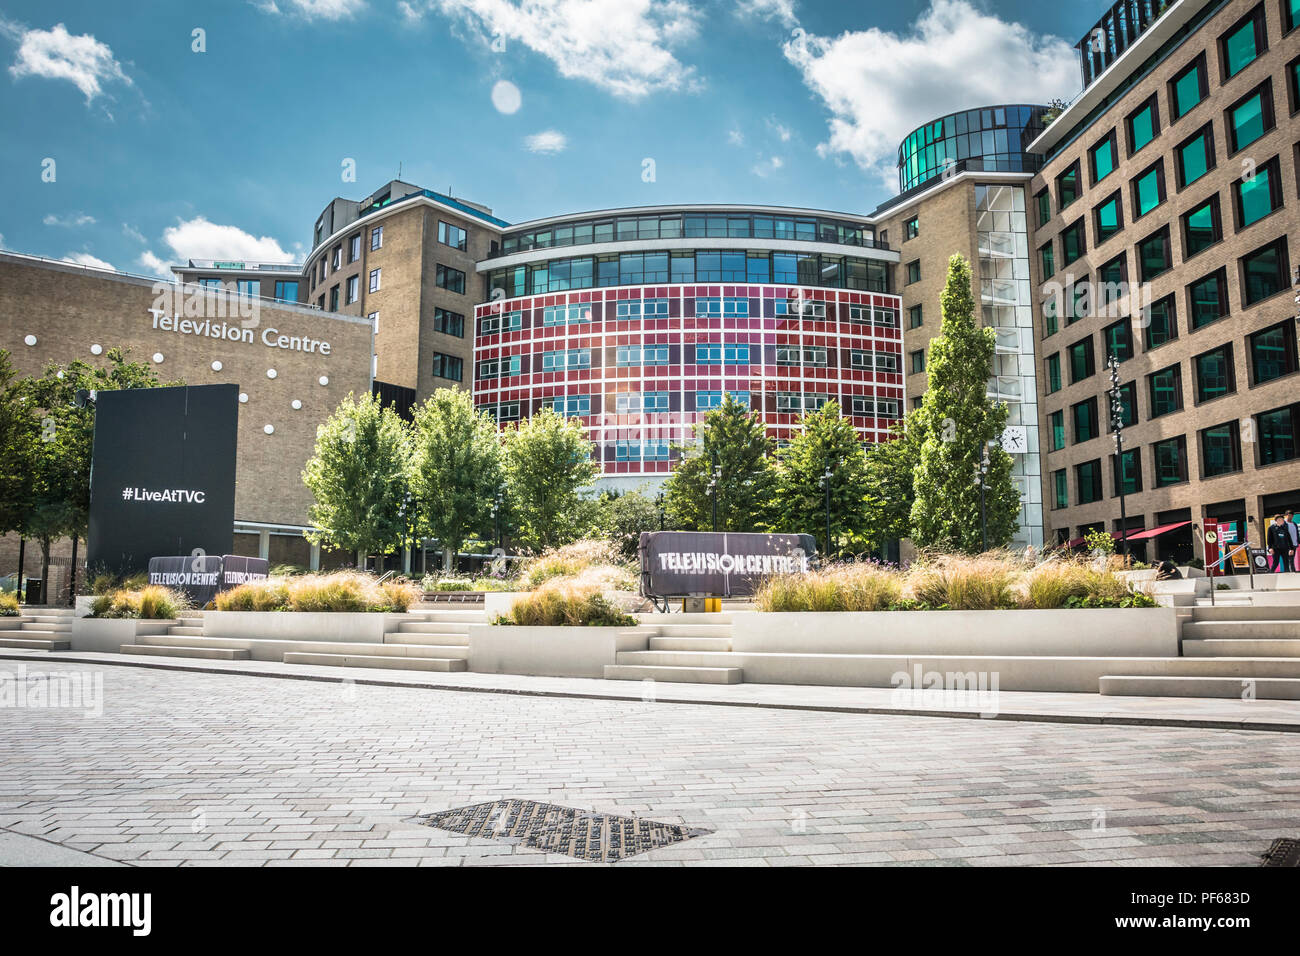 The exterior of the former BBC Television Centre, Wood Lane, London, England, U.K. Stock Photo